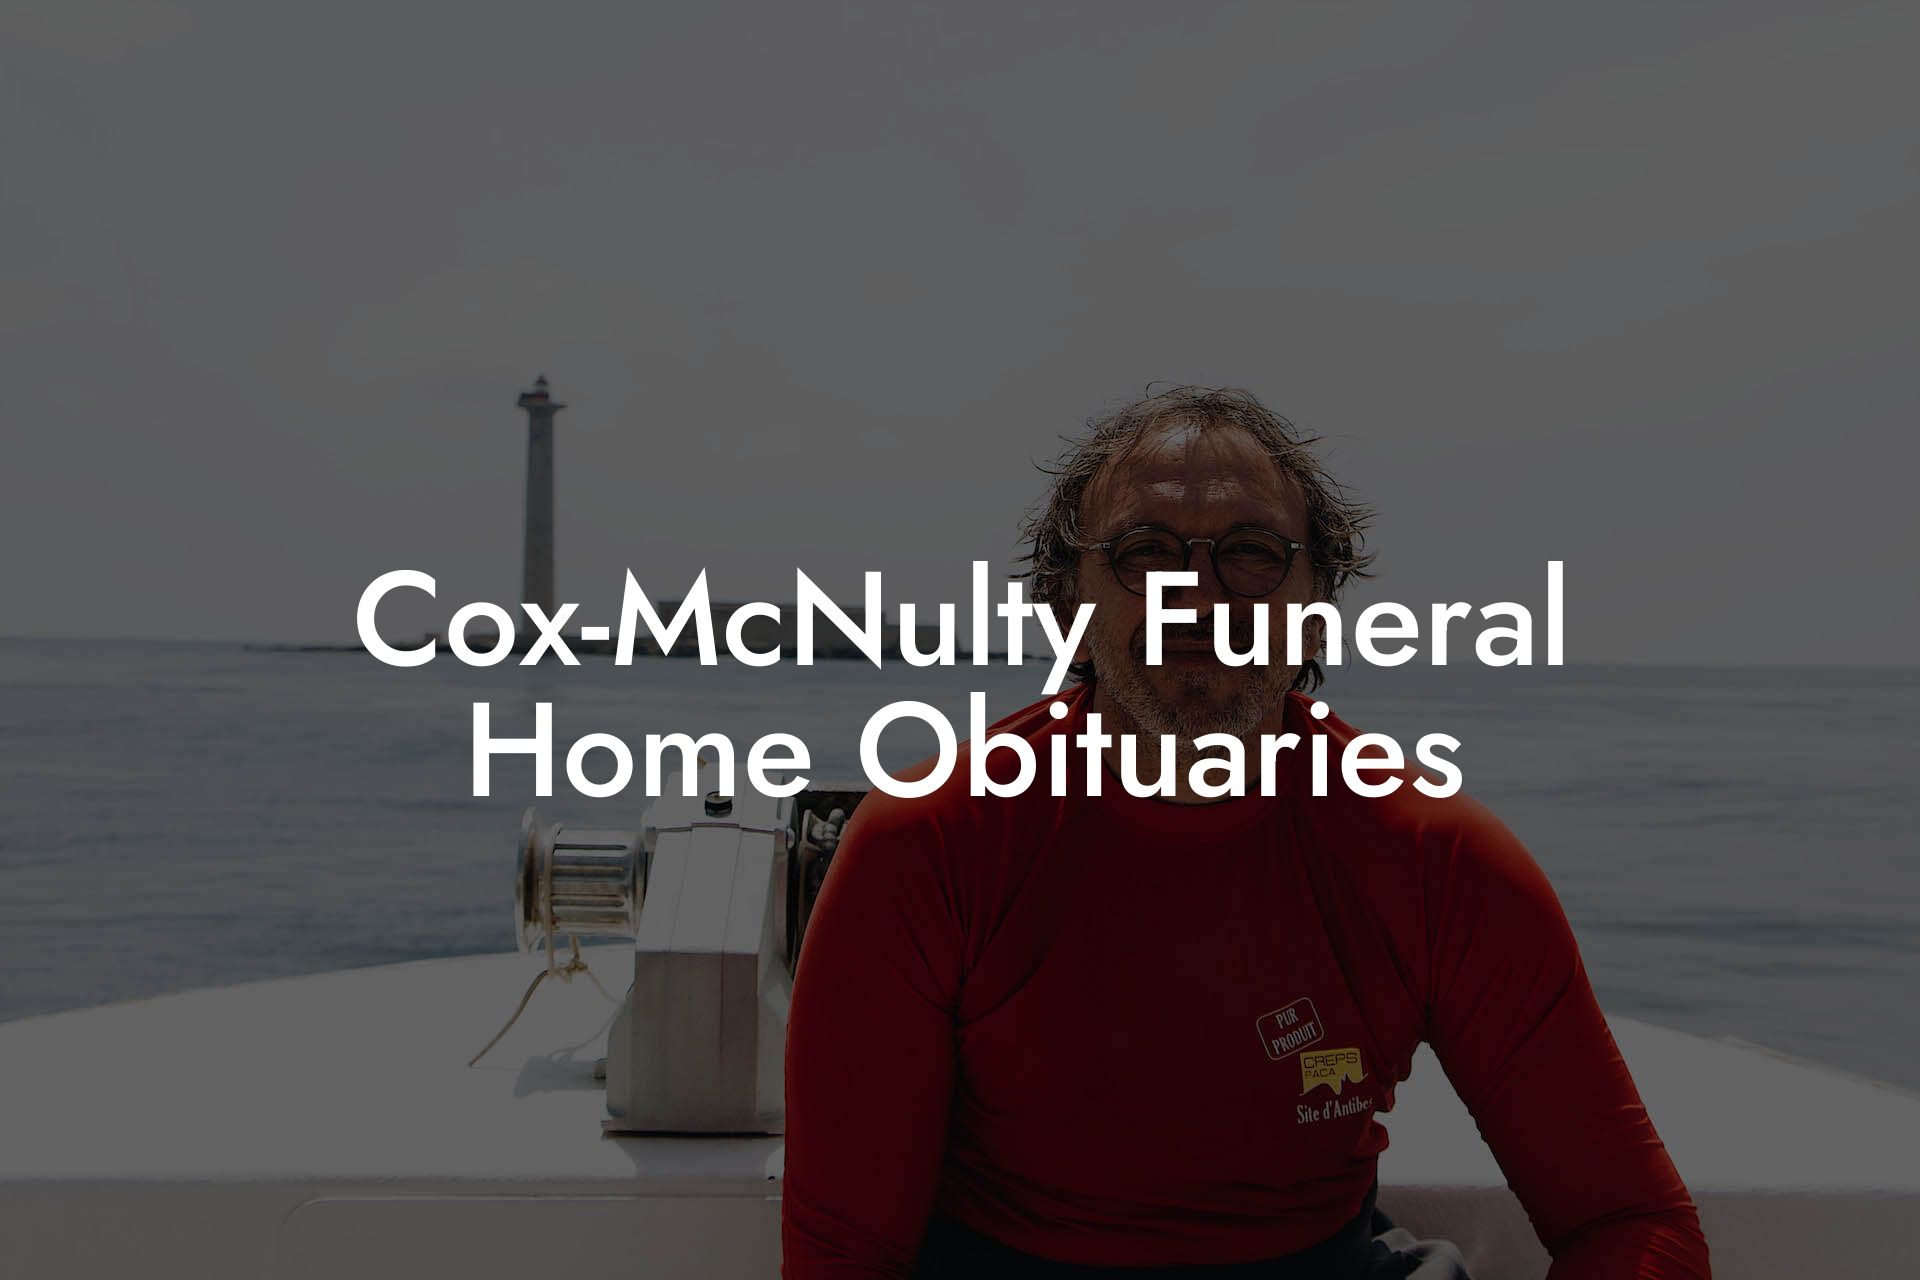 Cox-McNulty Funeral Home Obituaries